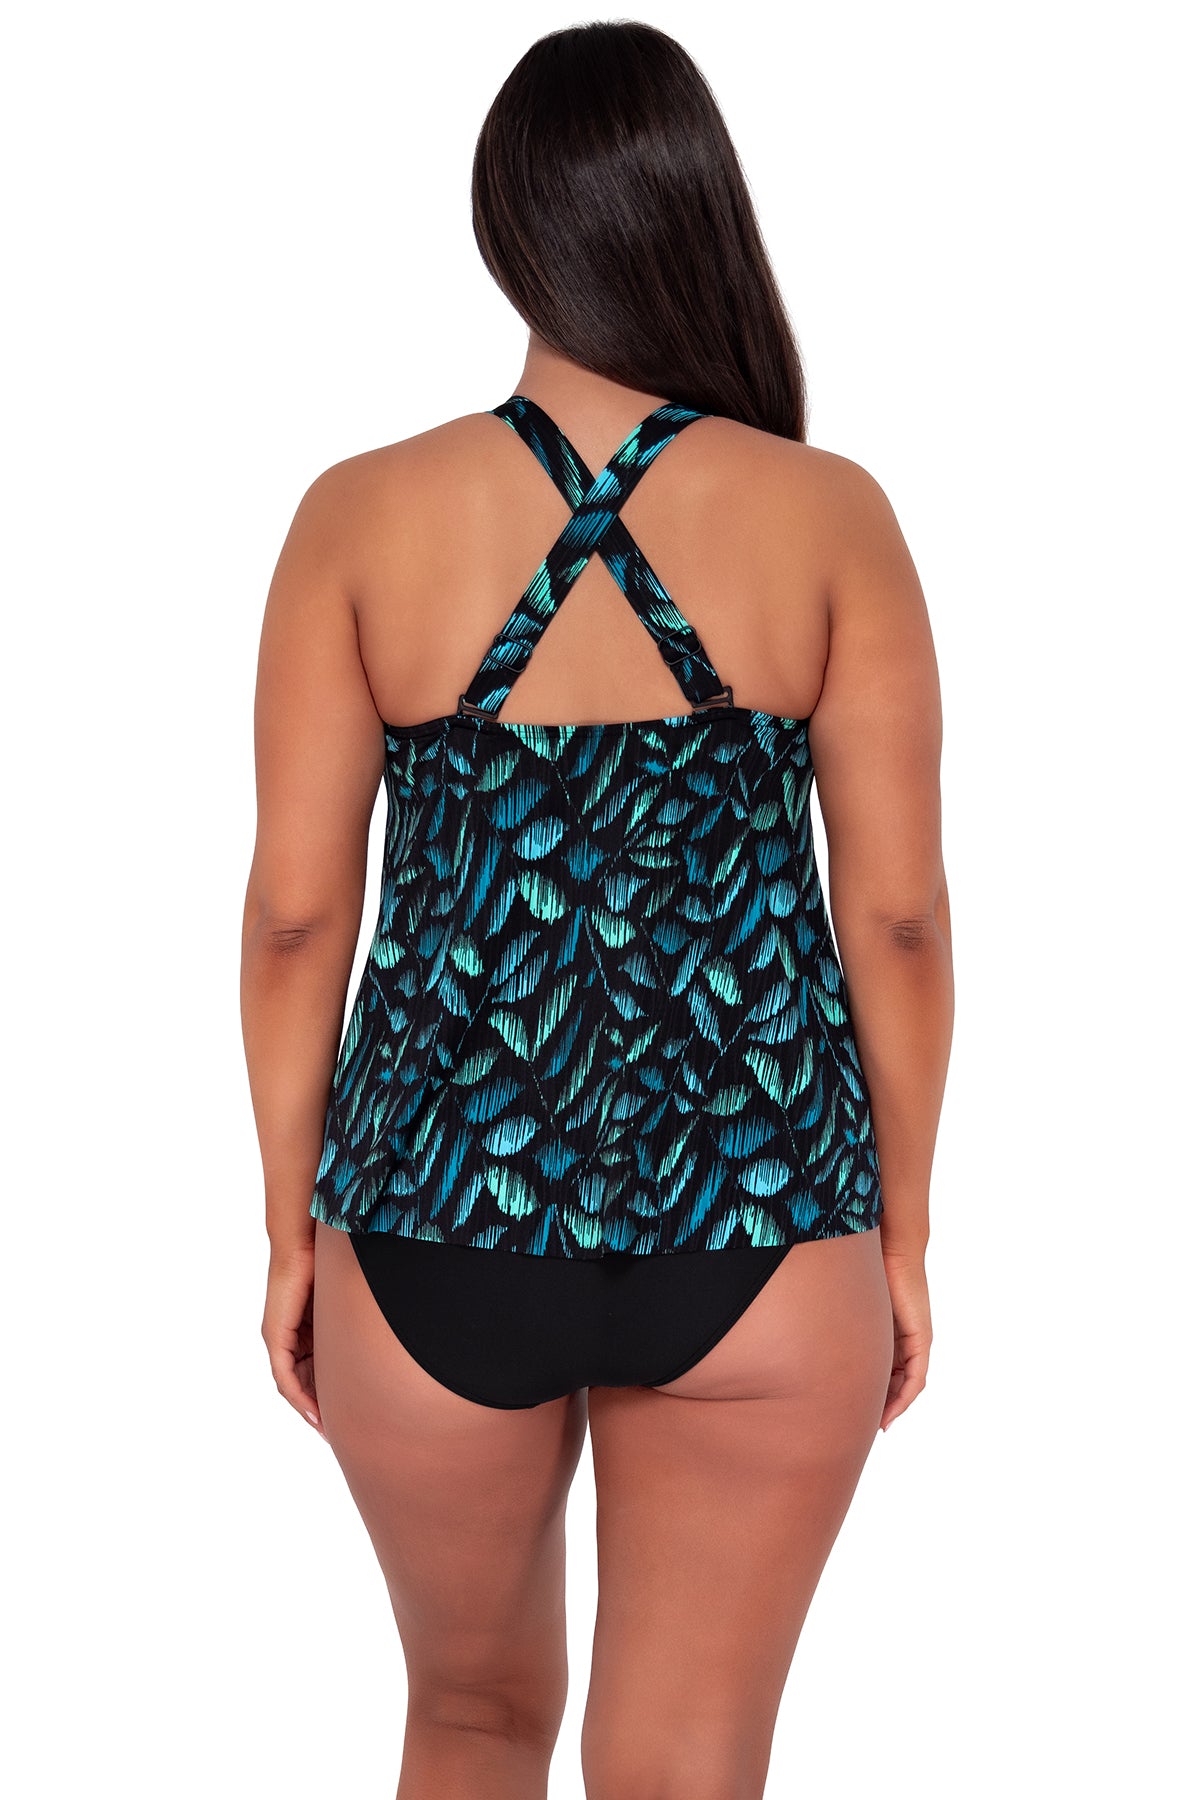 pose #1 of Nicki wearing Sunsets Escape Cascade Seagrass Texture Sadie Tankini Top